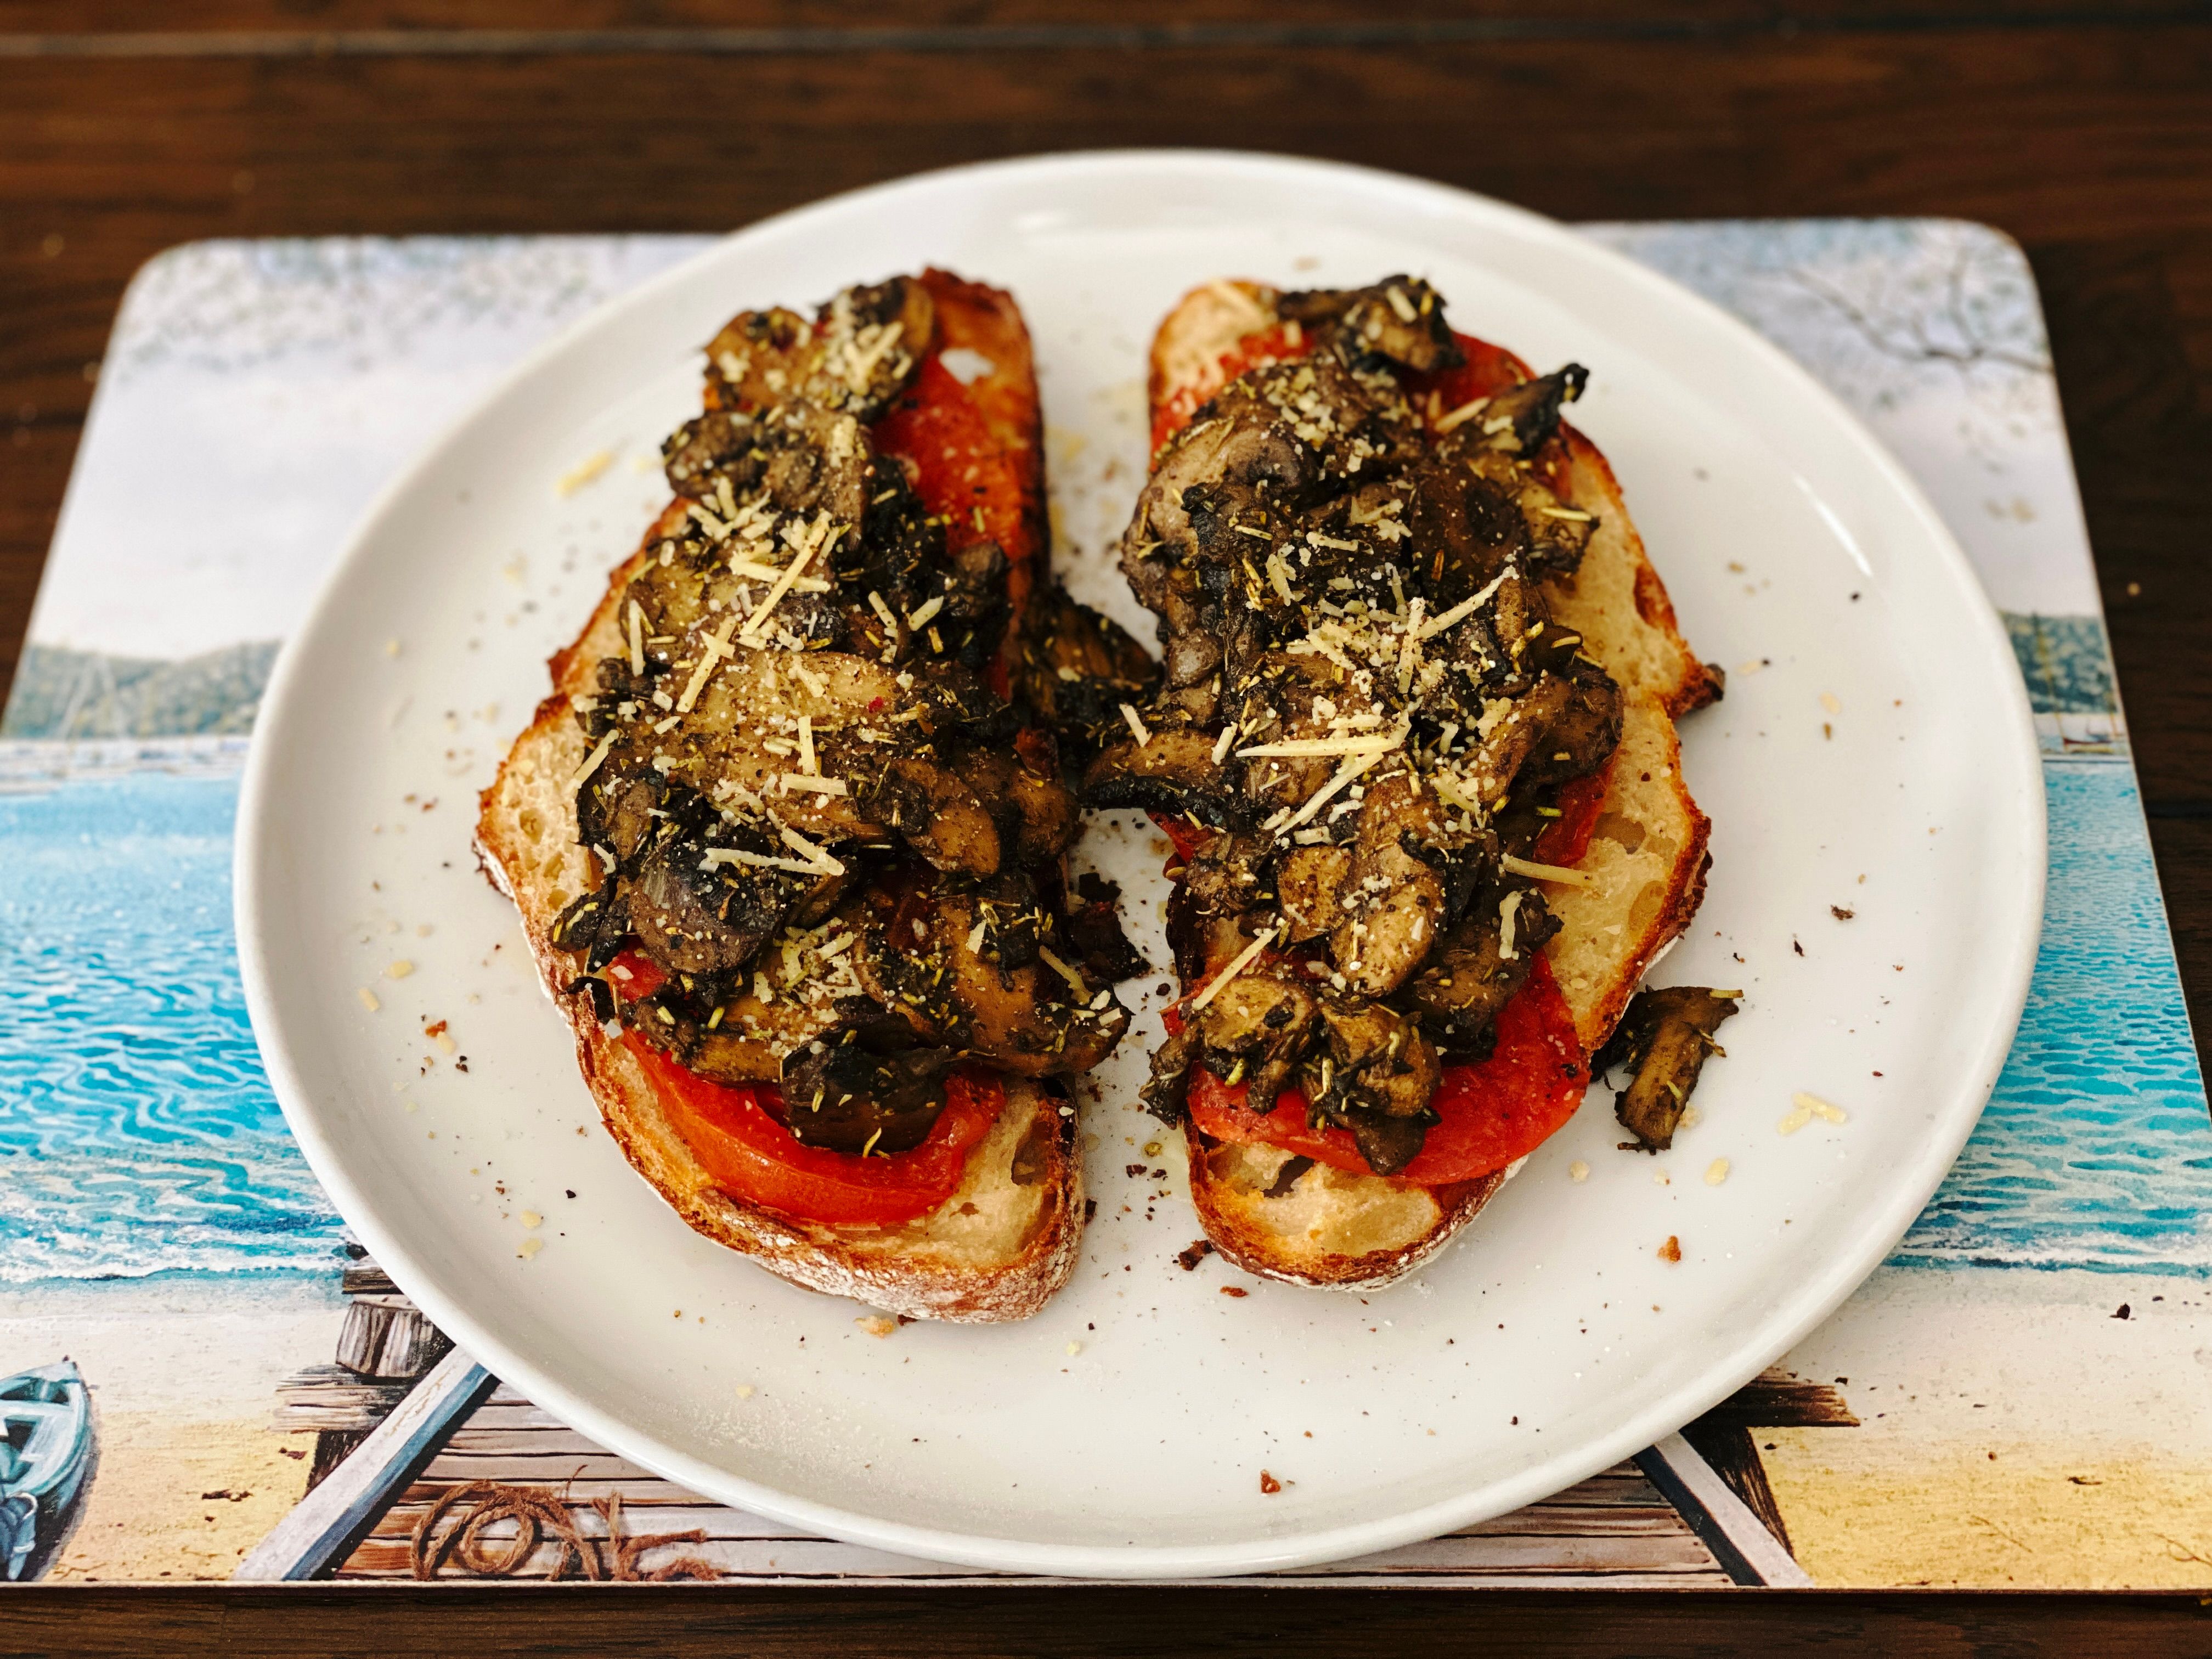 A photo of two slices of the aforementioned bread with cooked sliced tomato and mushrooms on top, sitting on a white dinner plate. There's just a little scattering of grated Parmesan cheese on top.